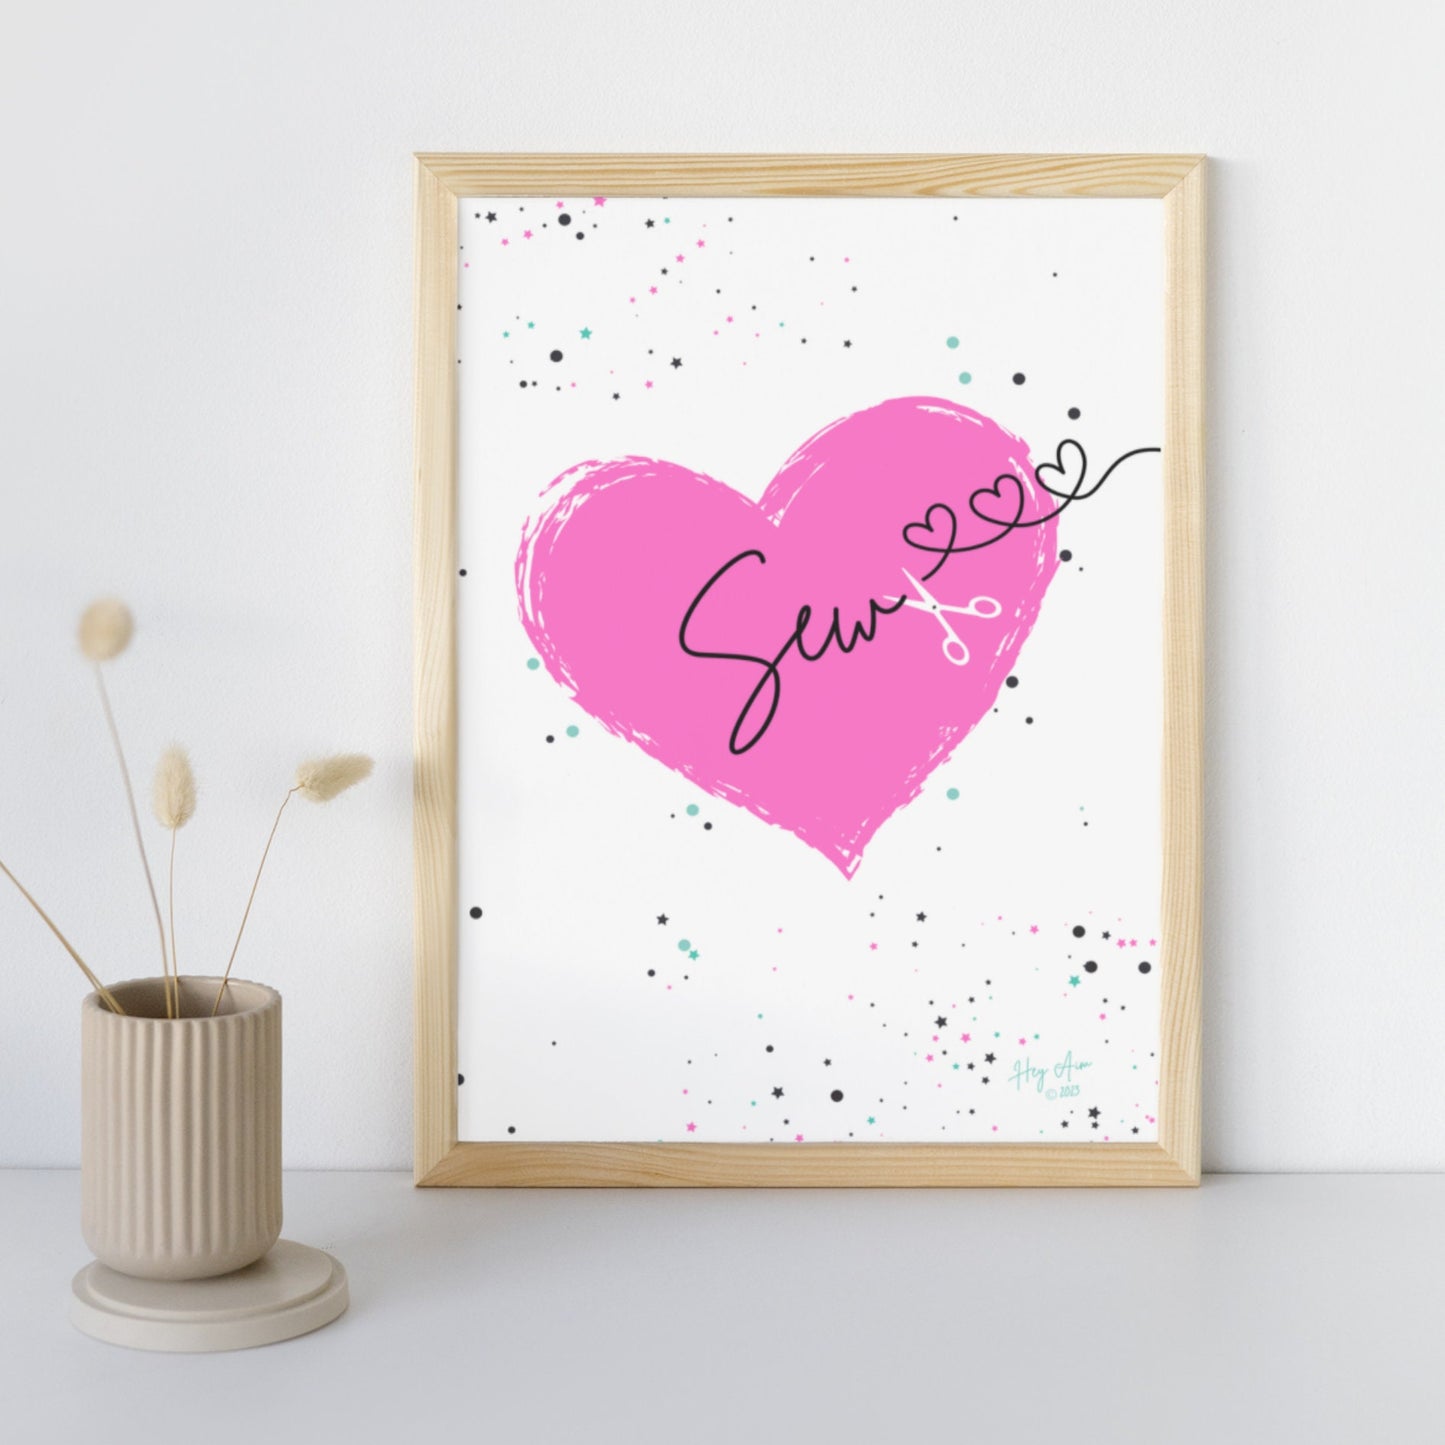 Sew | Digital Wall Art | Download Only | A3, A4, A5, A6 Sizes